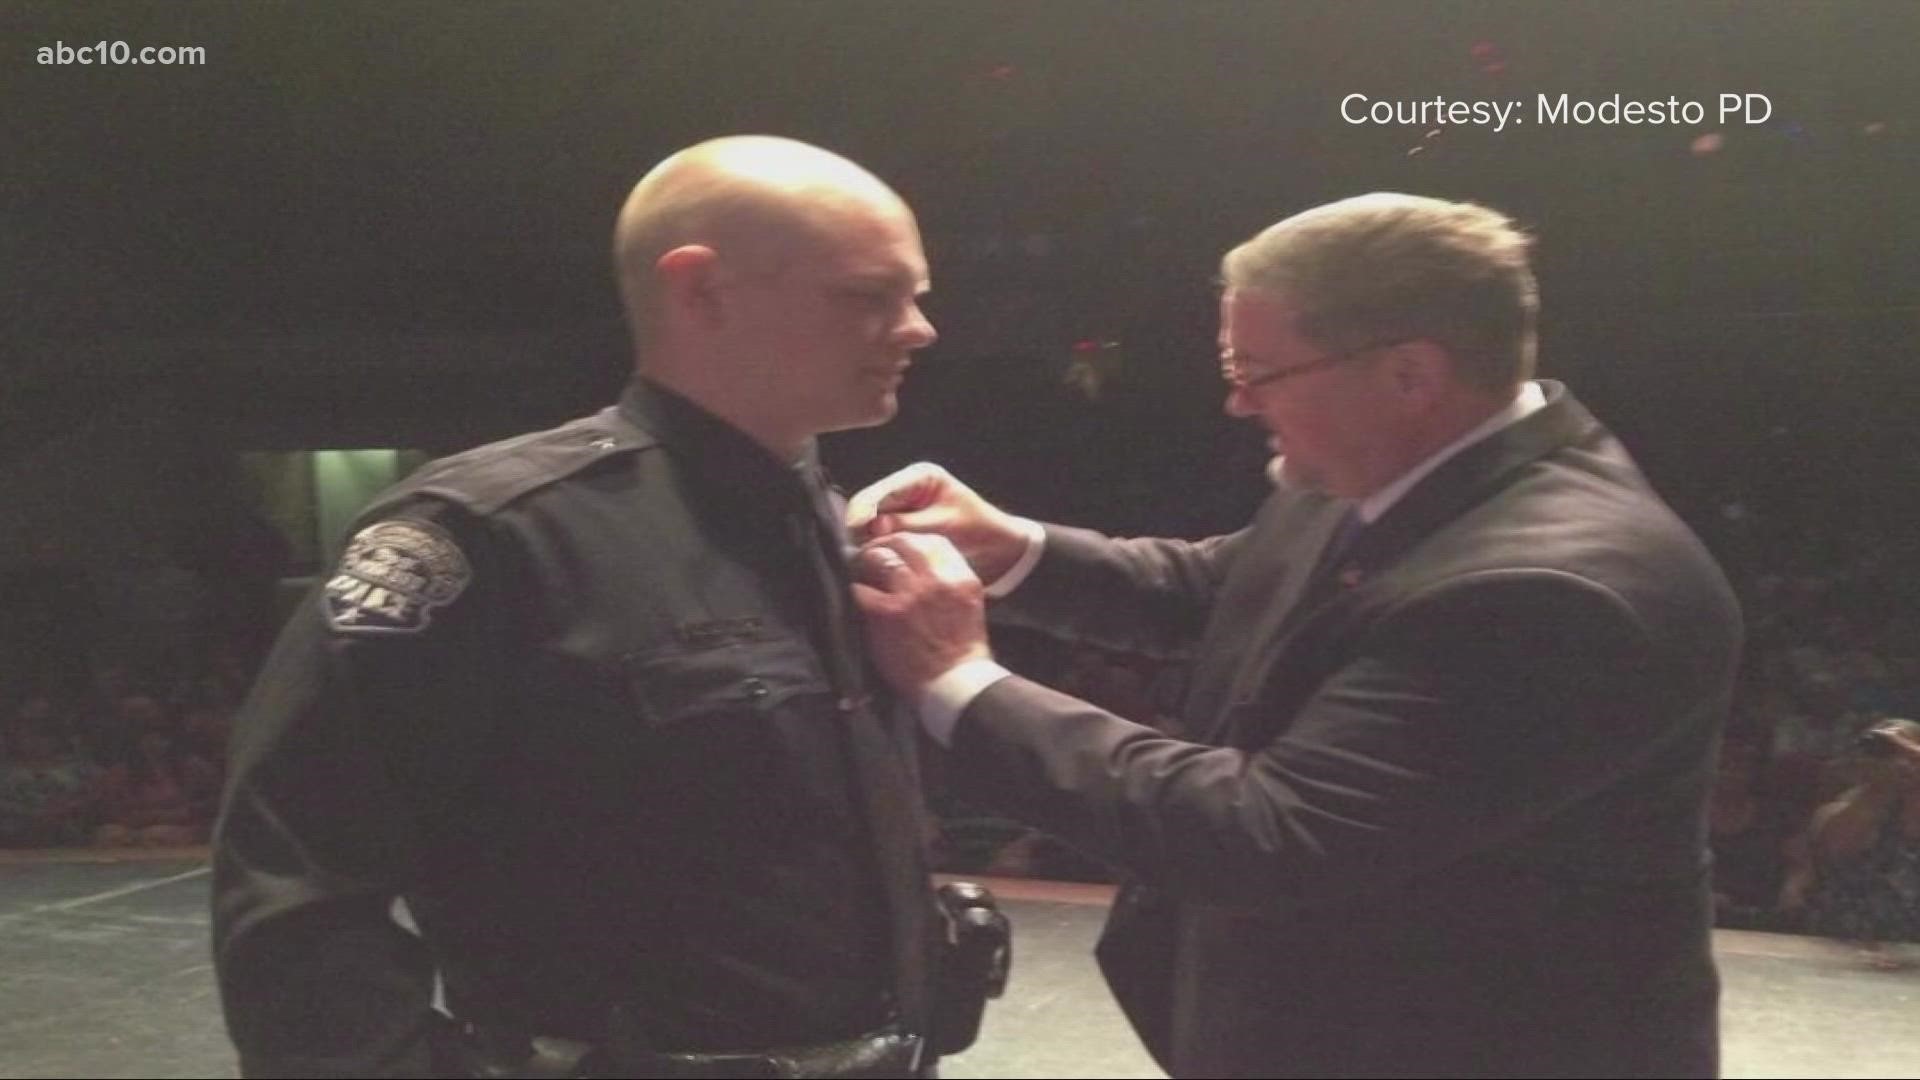 Police Chief Brandon Gillespie identified the injured officer in a Sunday evening update.